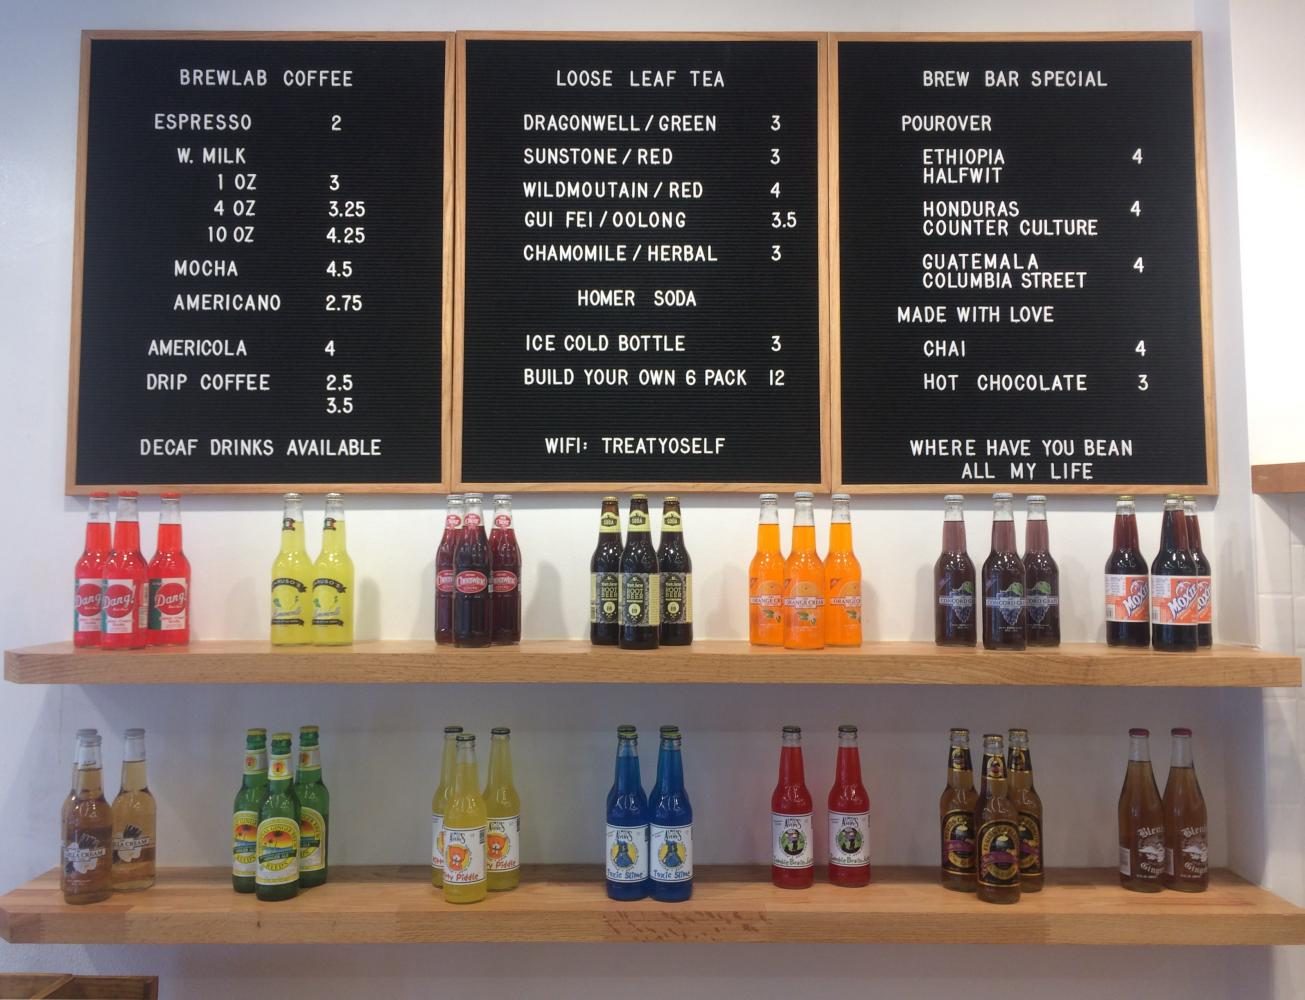 The+menu+at+BrewLab+sits+above+the+stores+craft+soda+bottles.+BrewLab%2C+recently+opened+and+located+in+Campustown%2C+serves+specialty+espresso+drinks+as+well+as+craft+soda.+